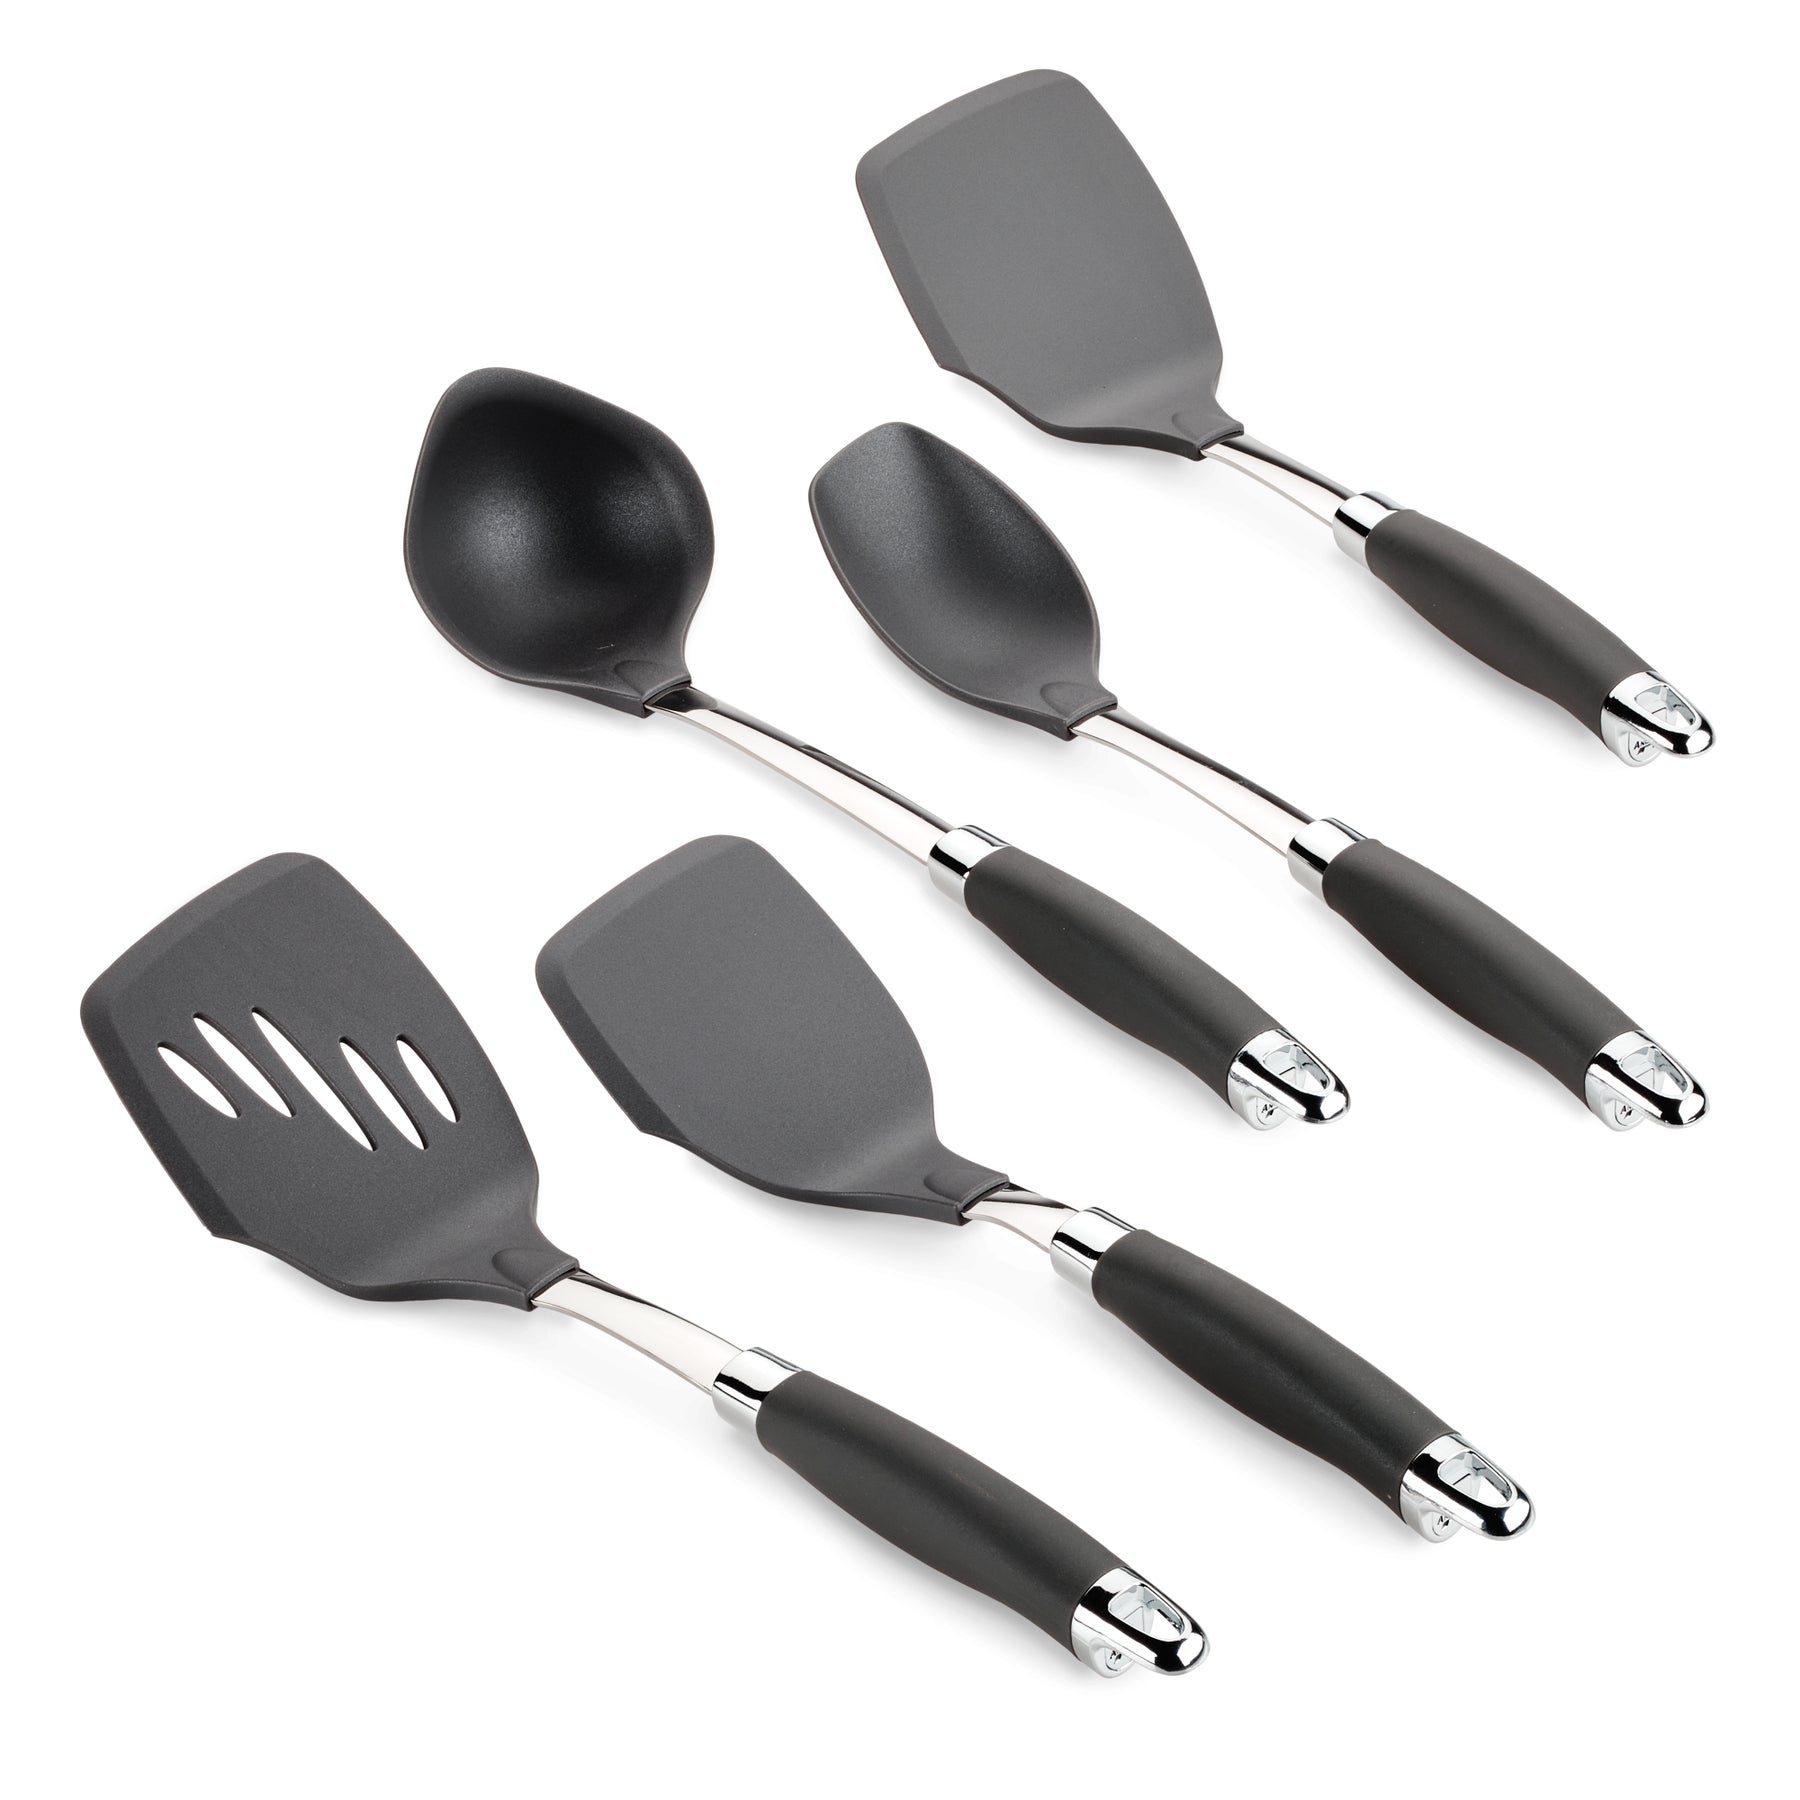 Anolon Tools and Gadgets 3-Piece Pasta Tool Set, Graphite